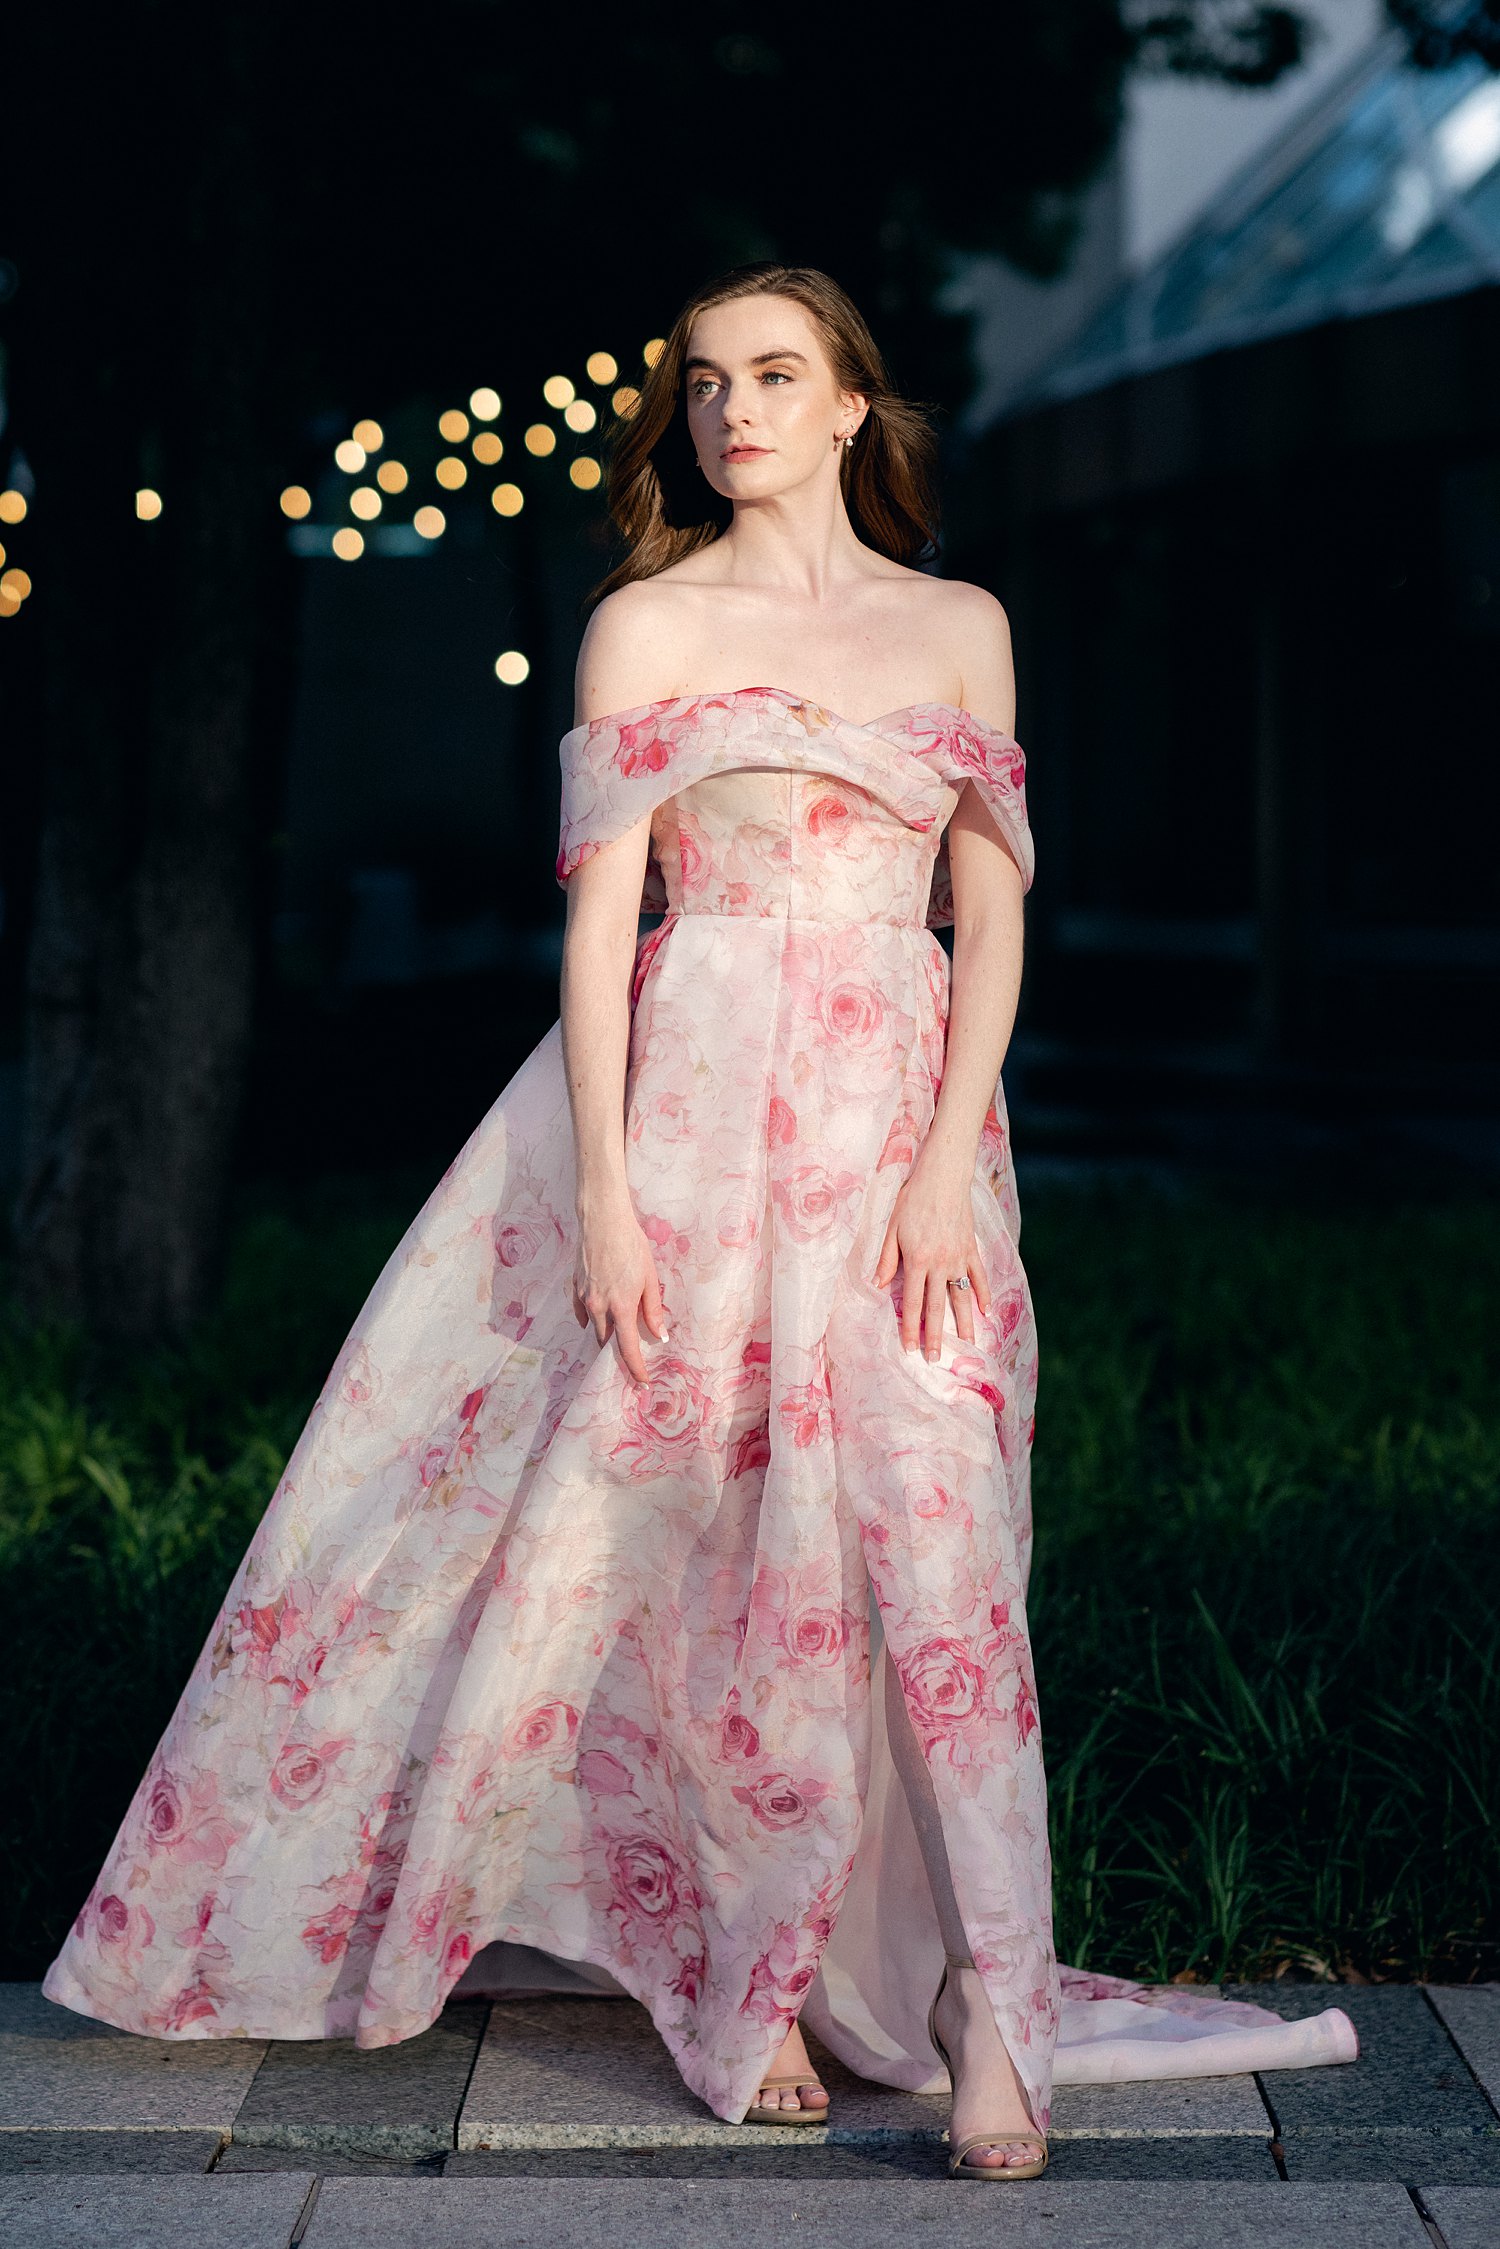 woman in Pink floral gown portrait in front of dark background